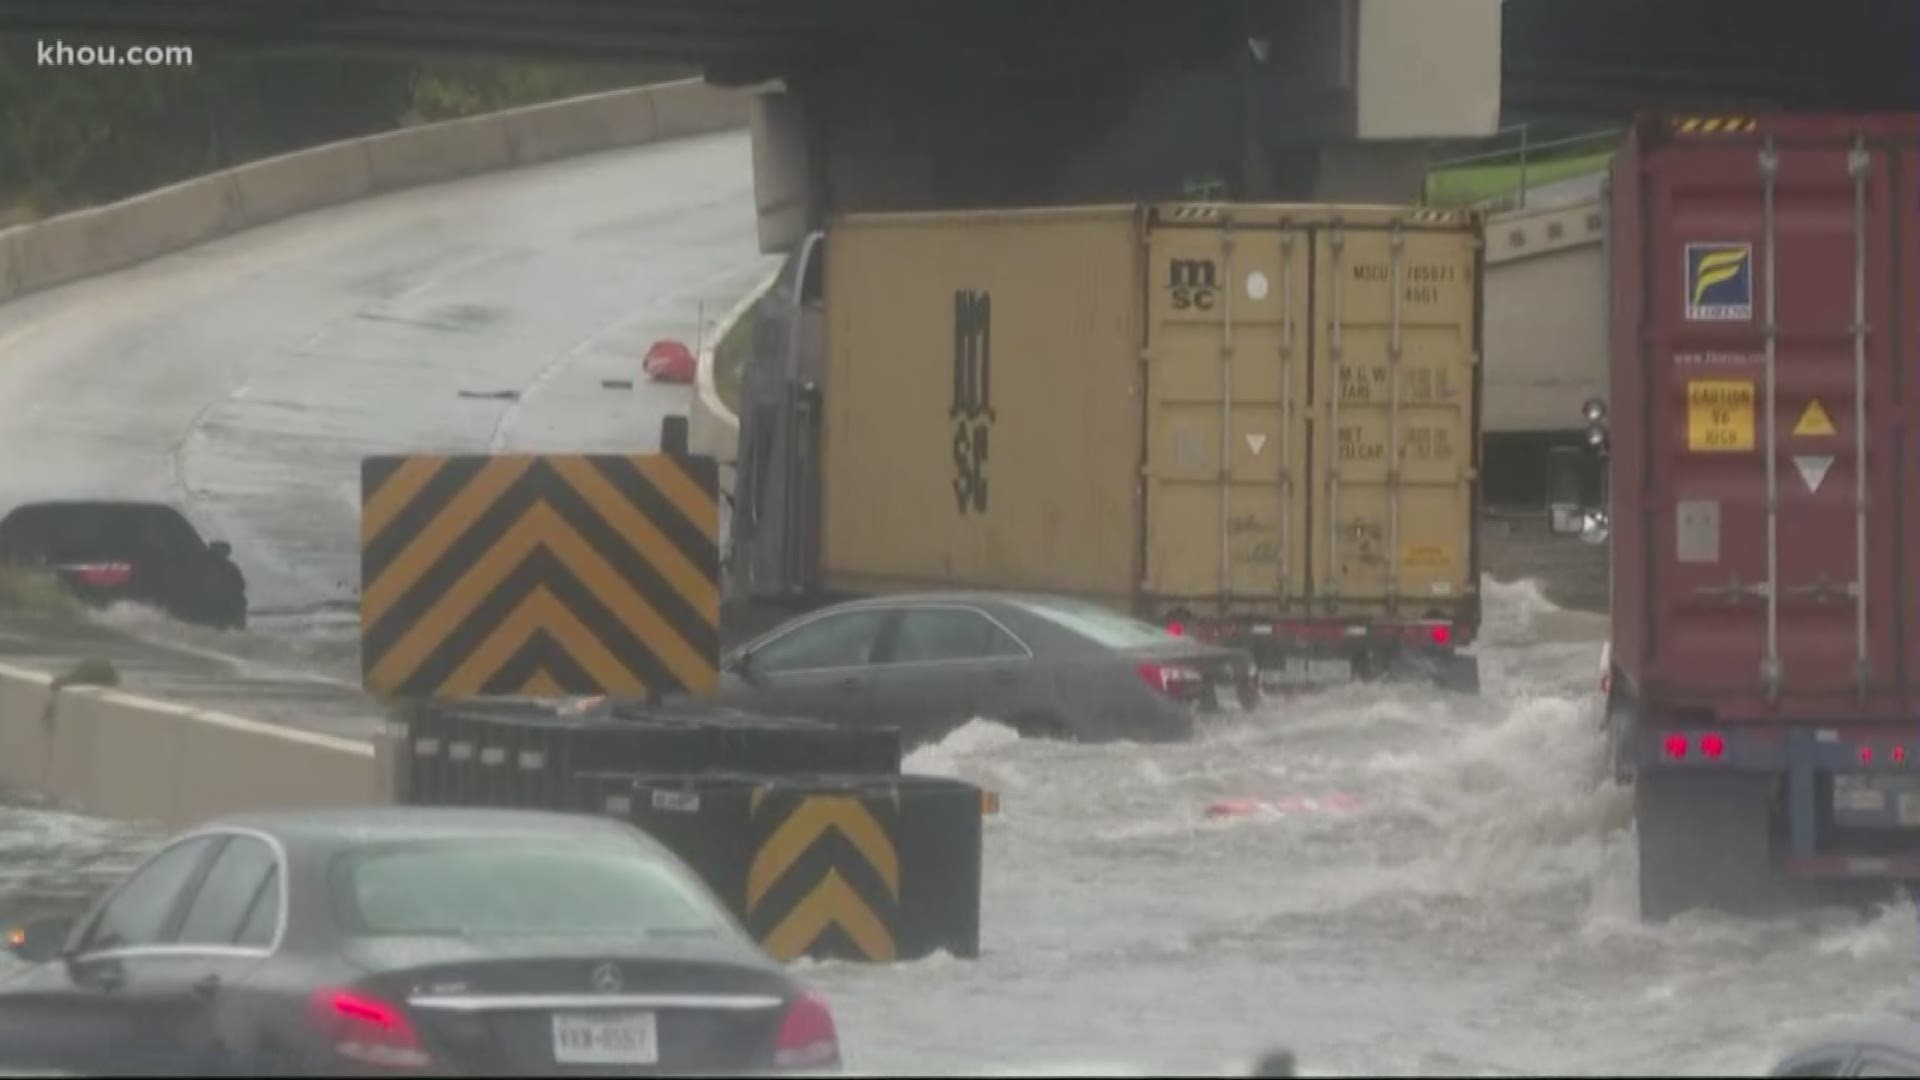 Floodwaters along the Katy Freeway at the West Loop finally began to recede late Thursday afternoon, letting traffic move who had waited for hours.